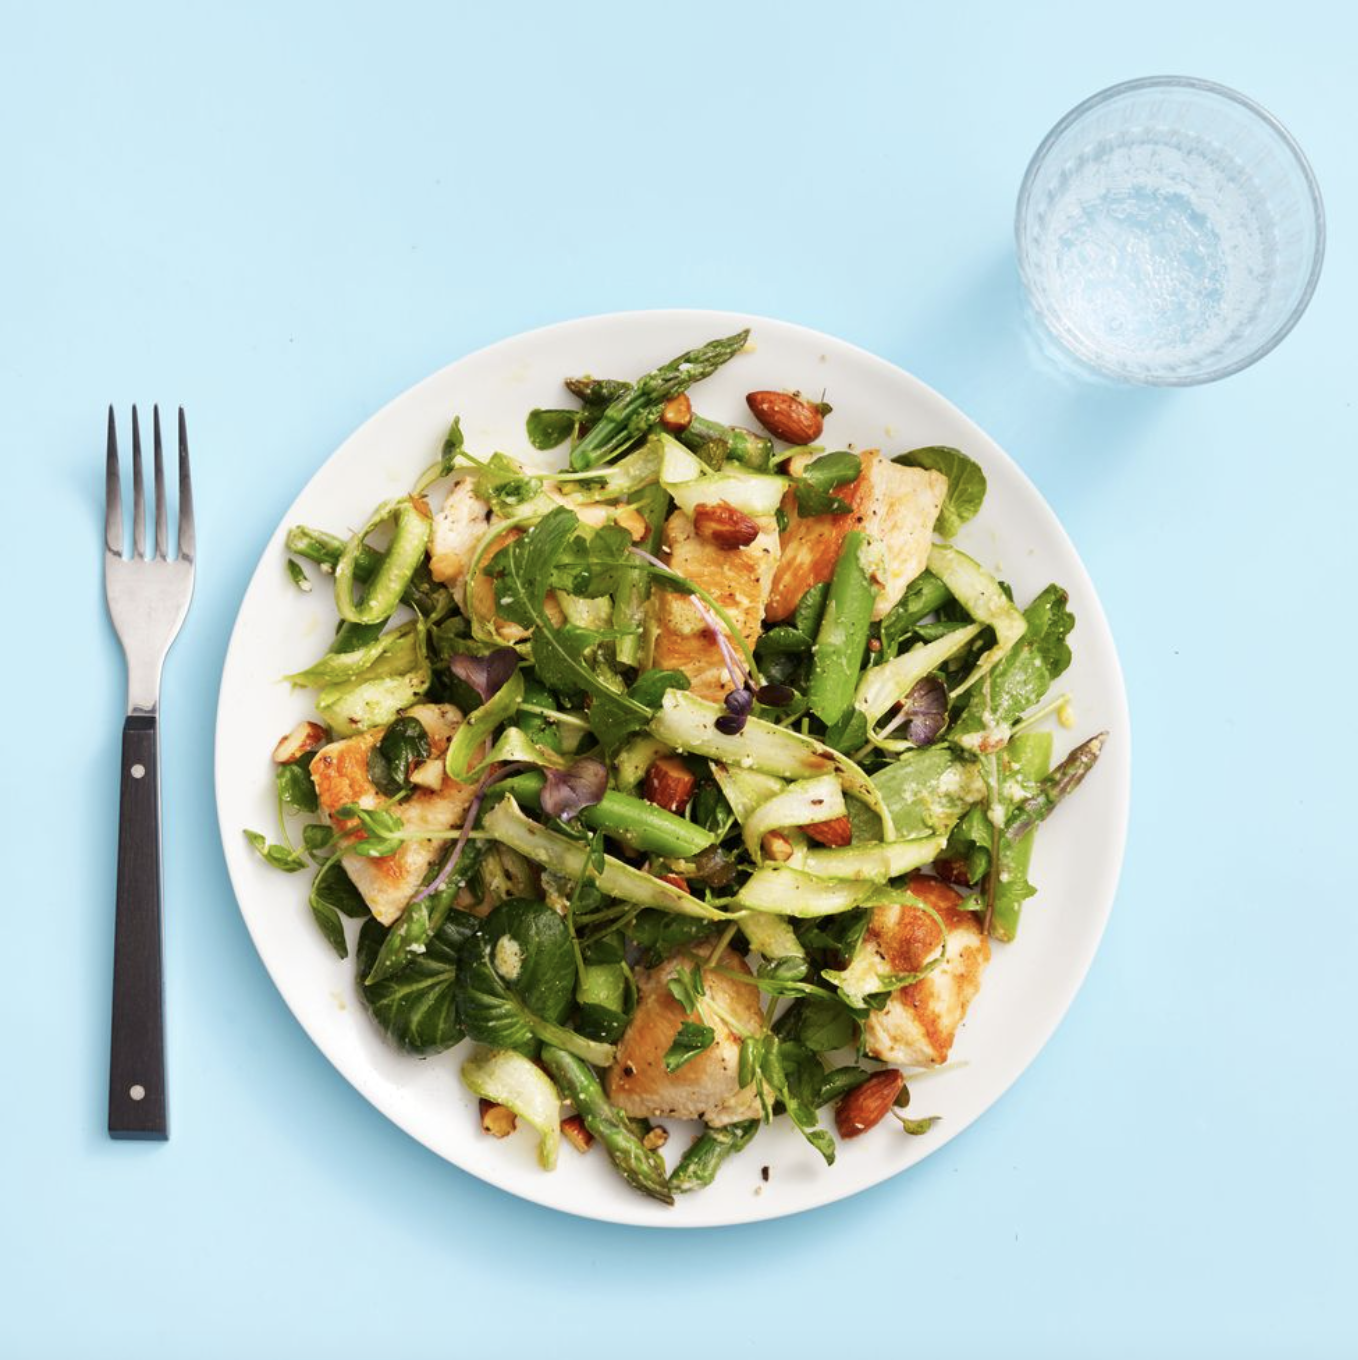  Chicken and Asparagus Salad with Meyer Lemon Vinaigrette by Good Housekeeping 